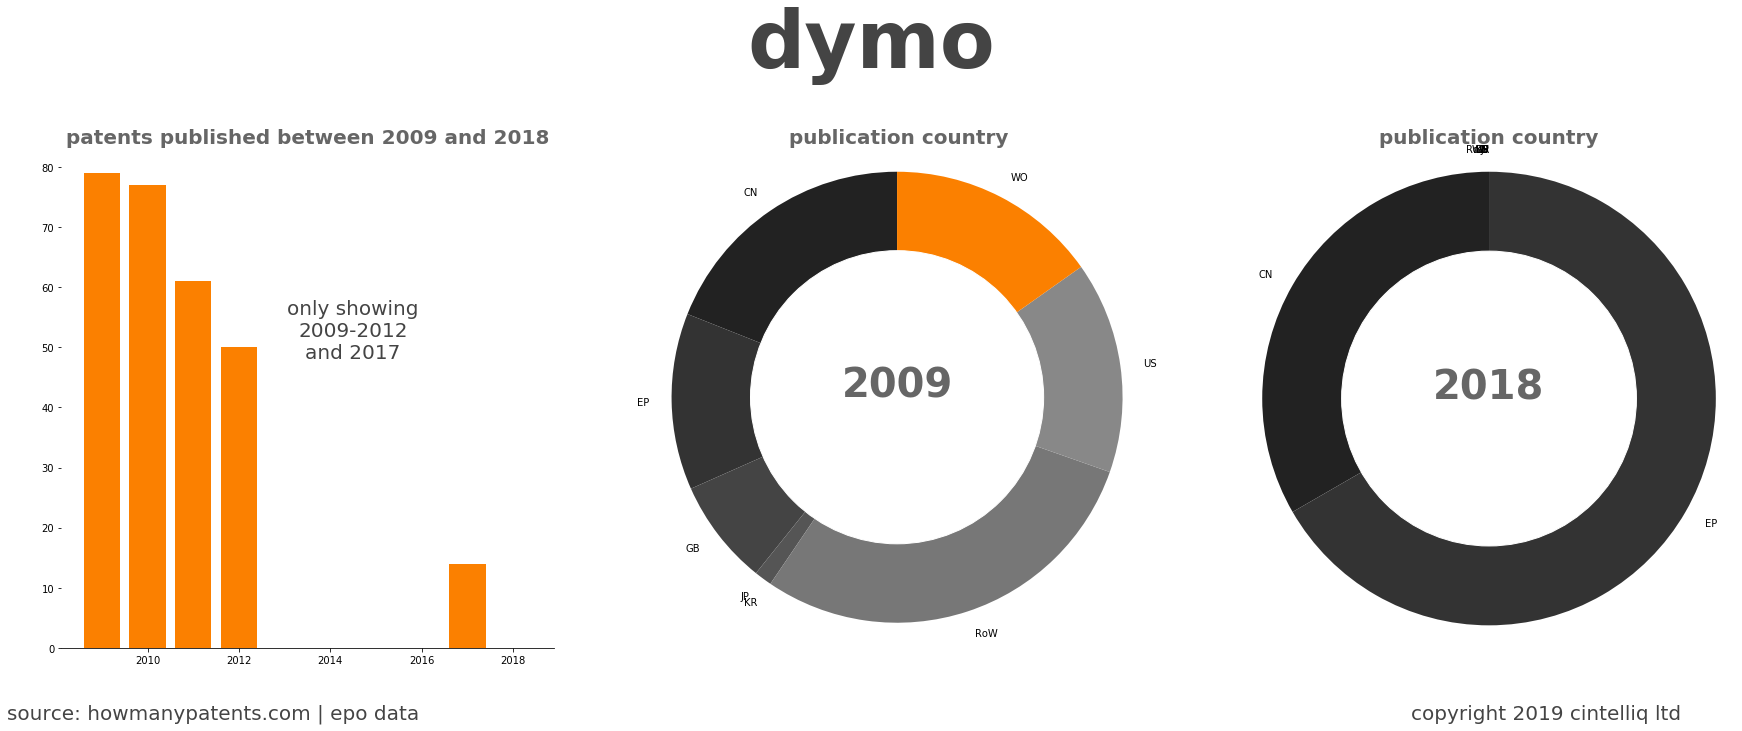 summary of patents for Dymo